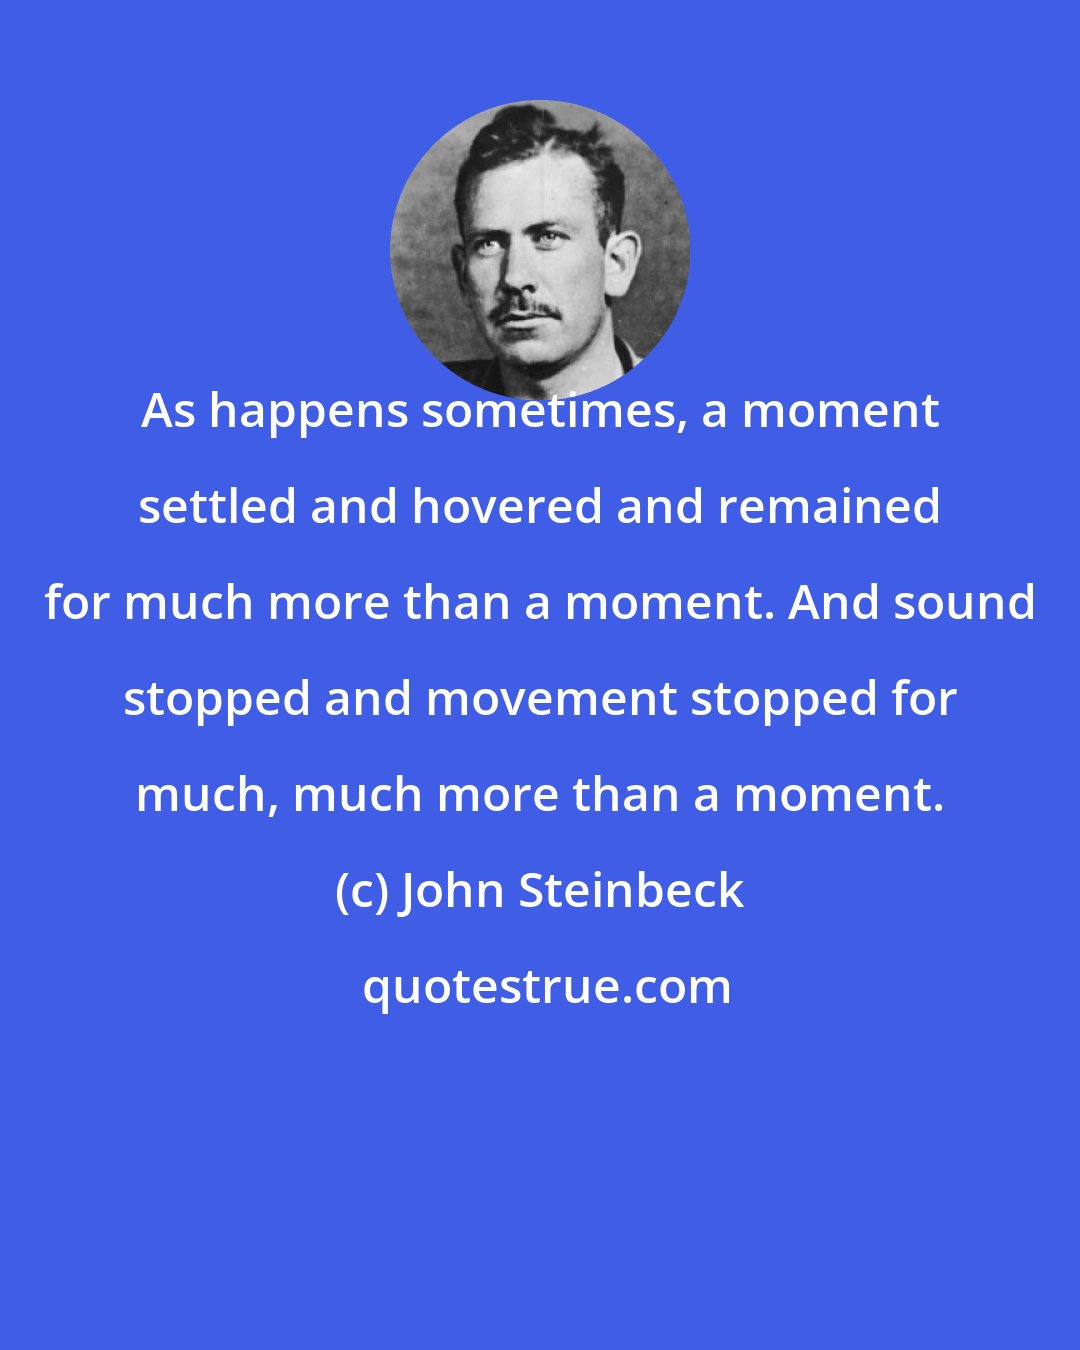 John Steinbeck: As happens sometimes, a moment settled and hovered and remained for much more than a moment. And sound stopped and movement stopped for much, much more than a moment.